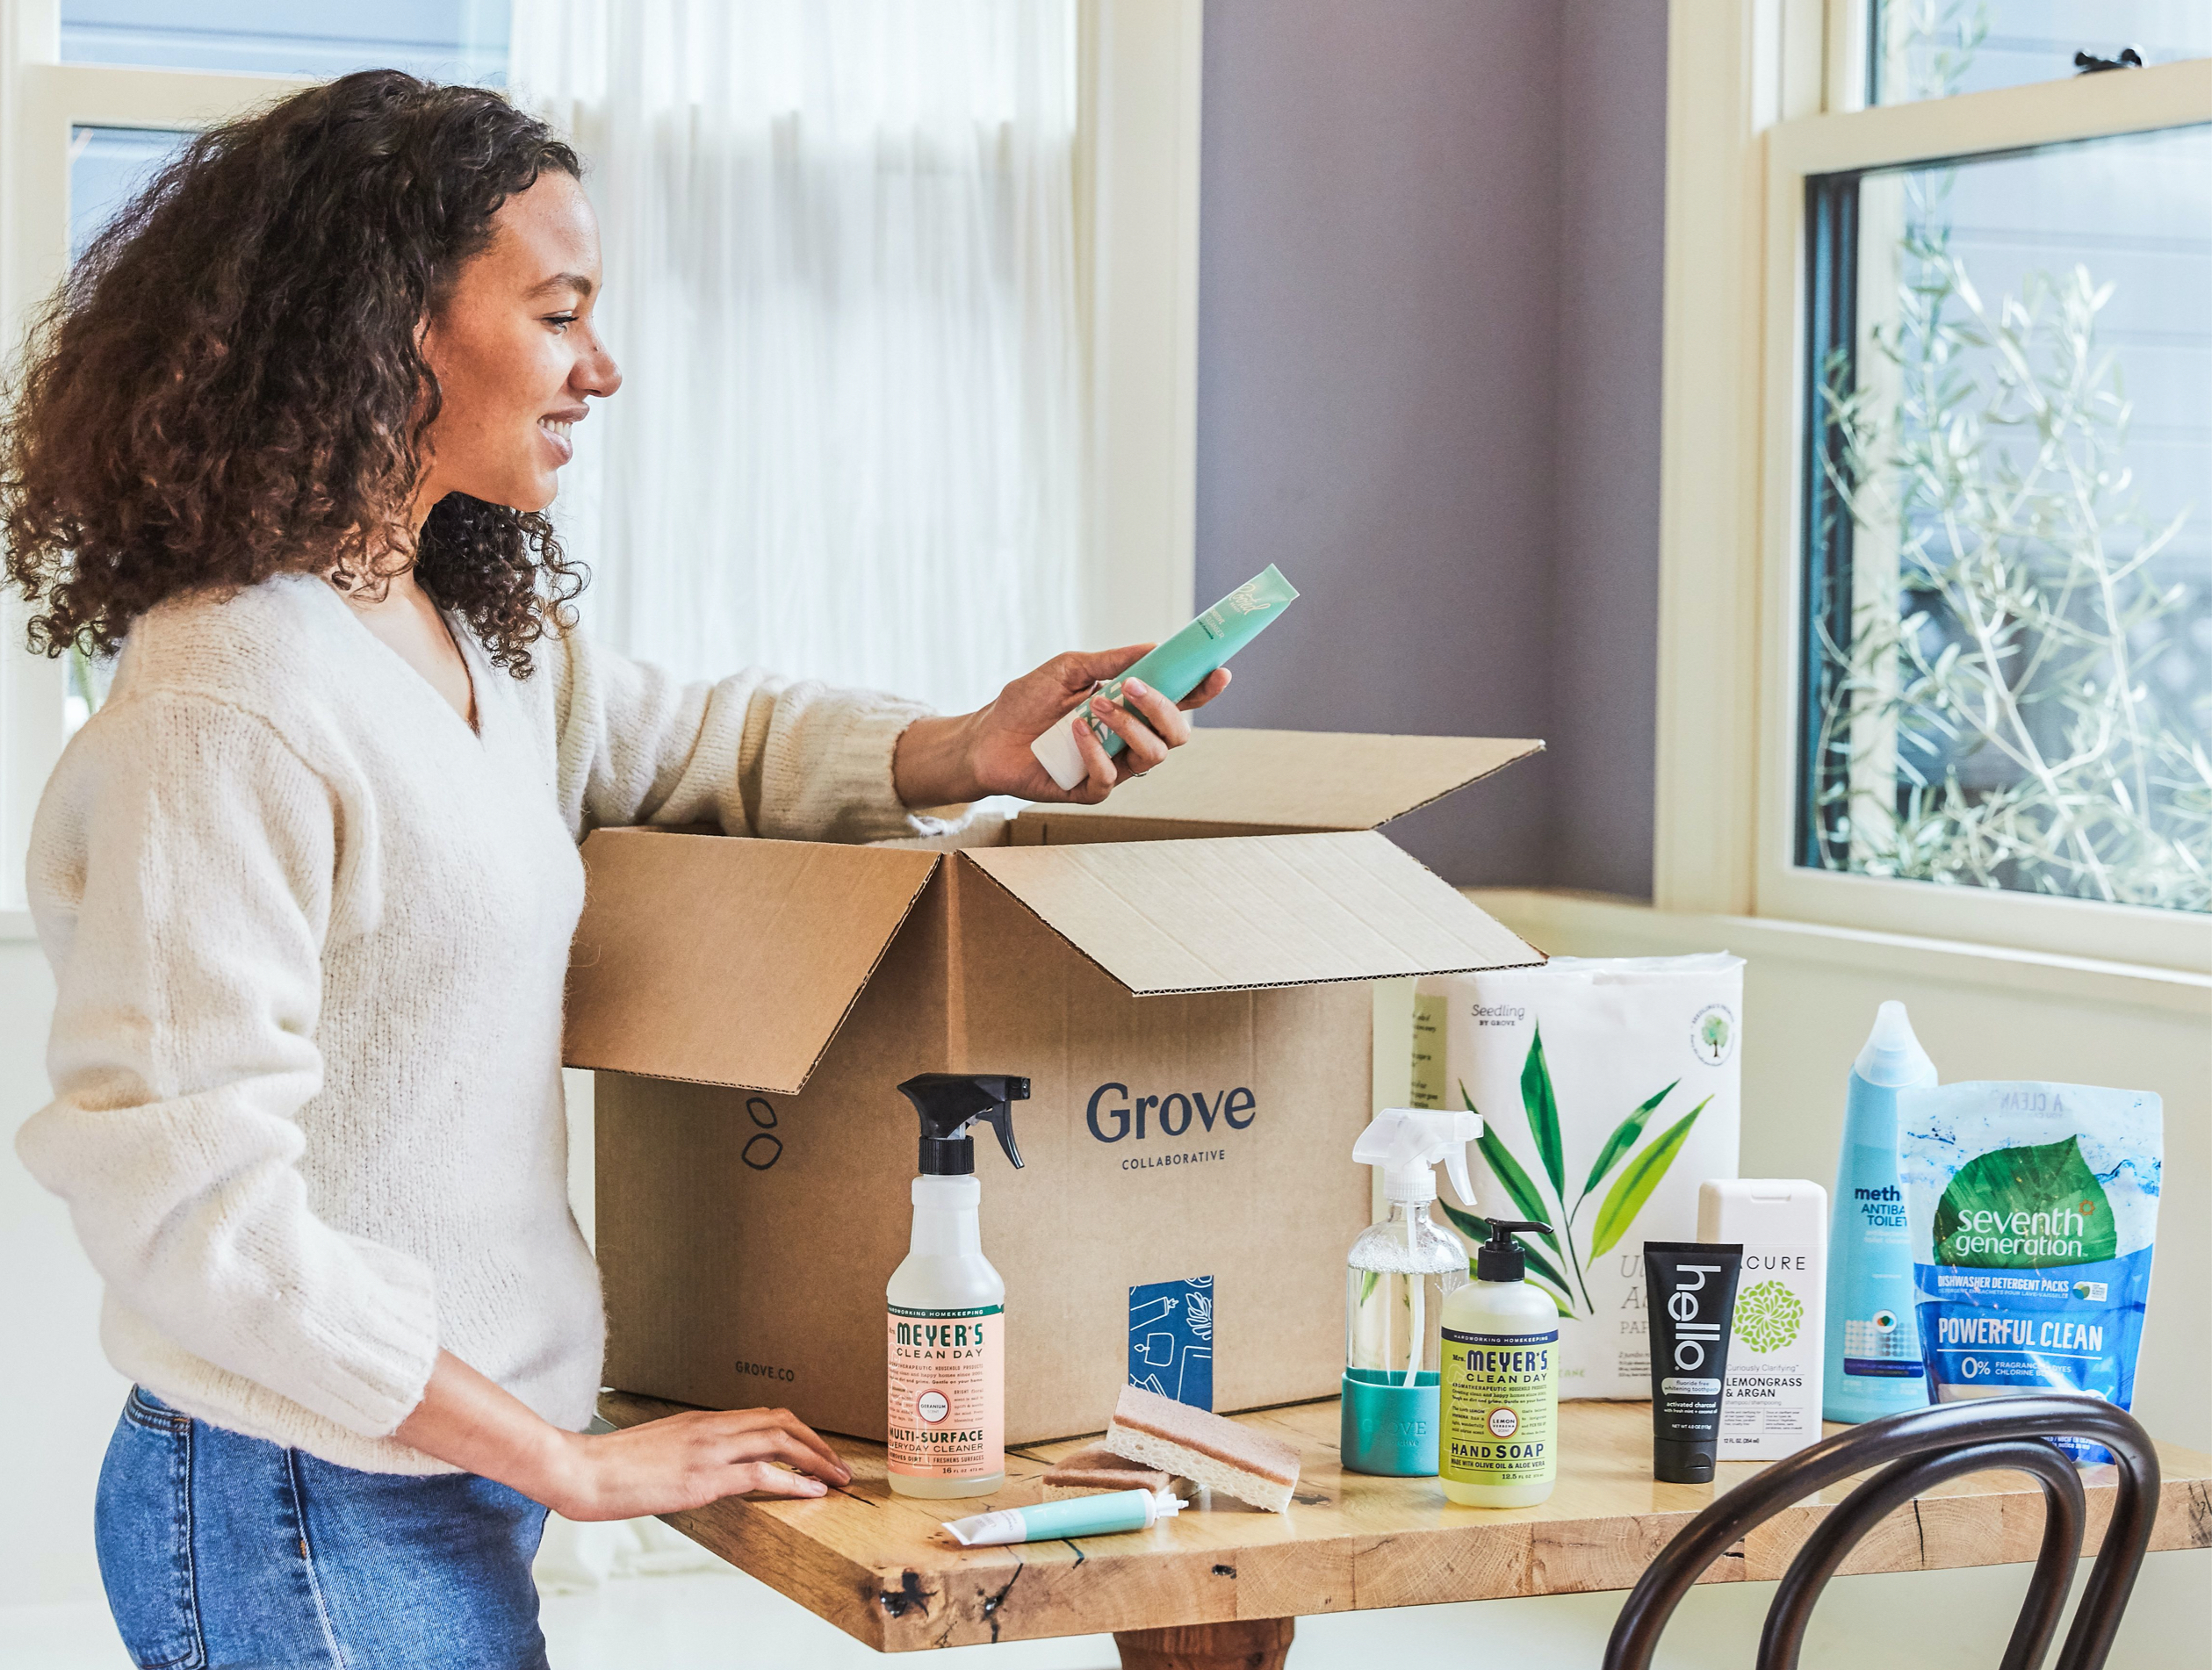 Image of a woman unboxing cleaning supplies from Grove.